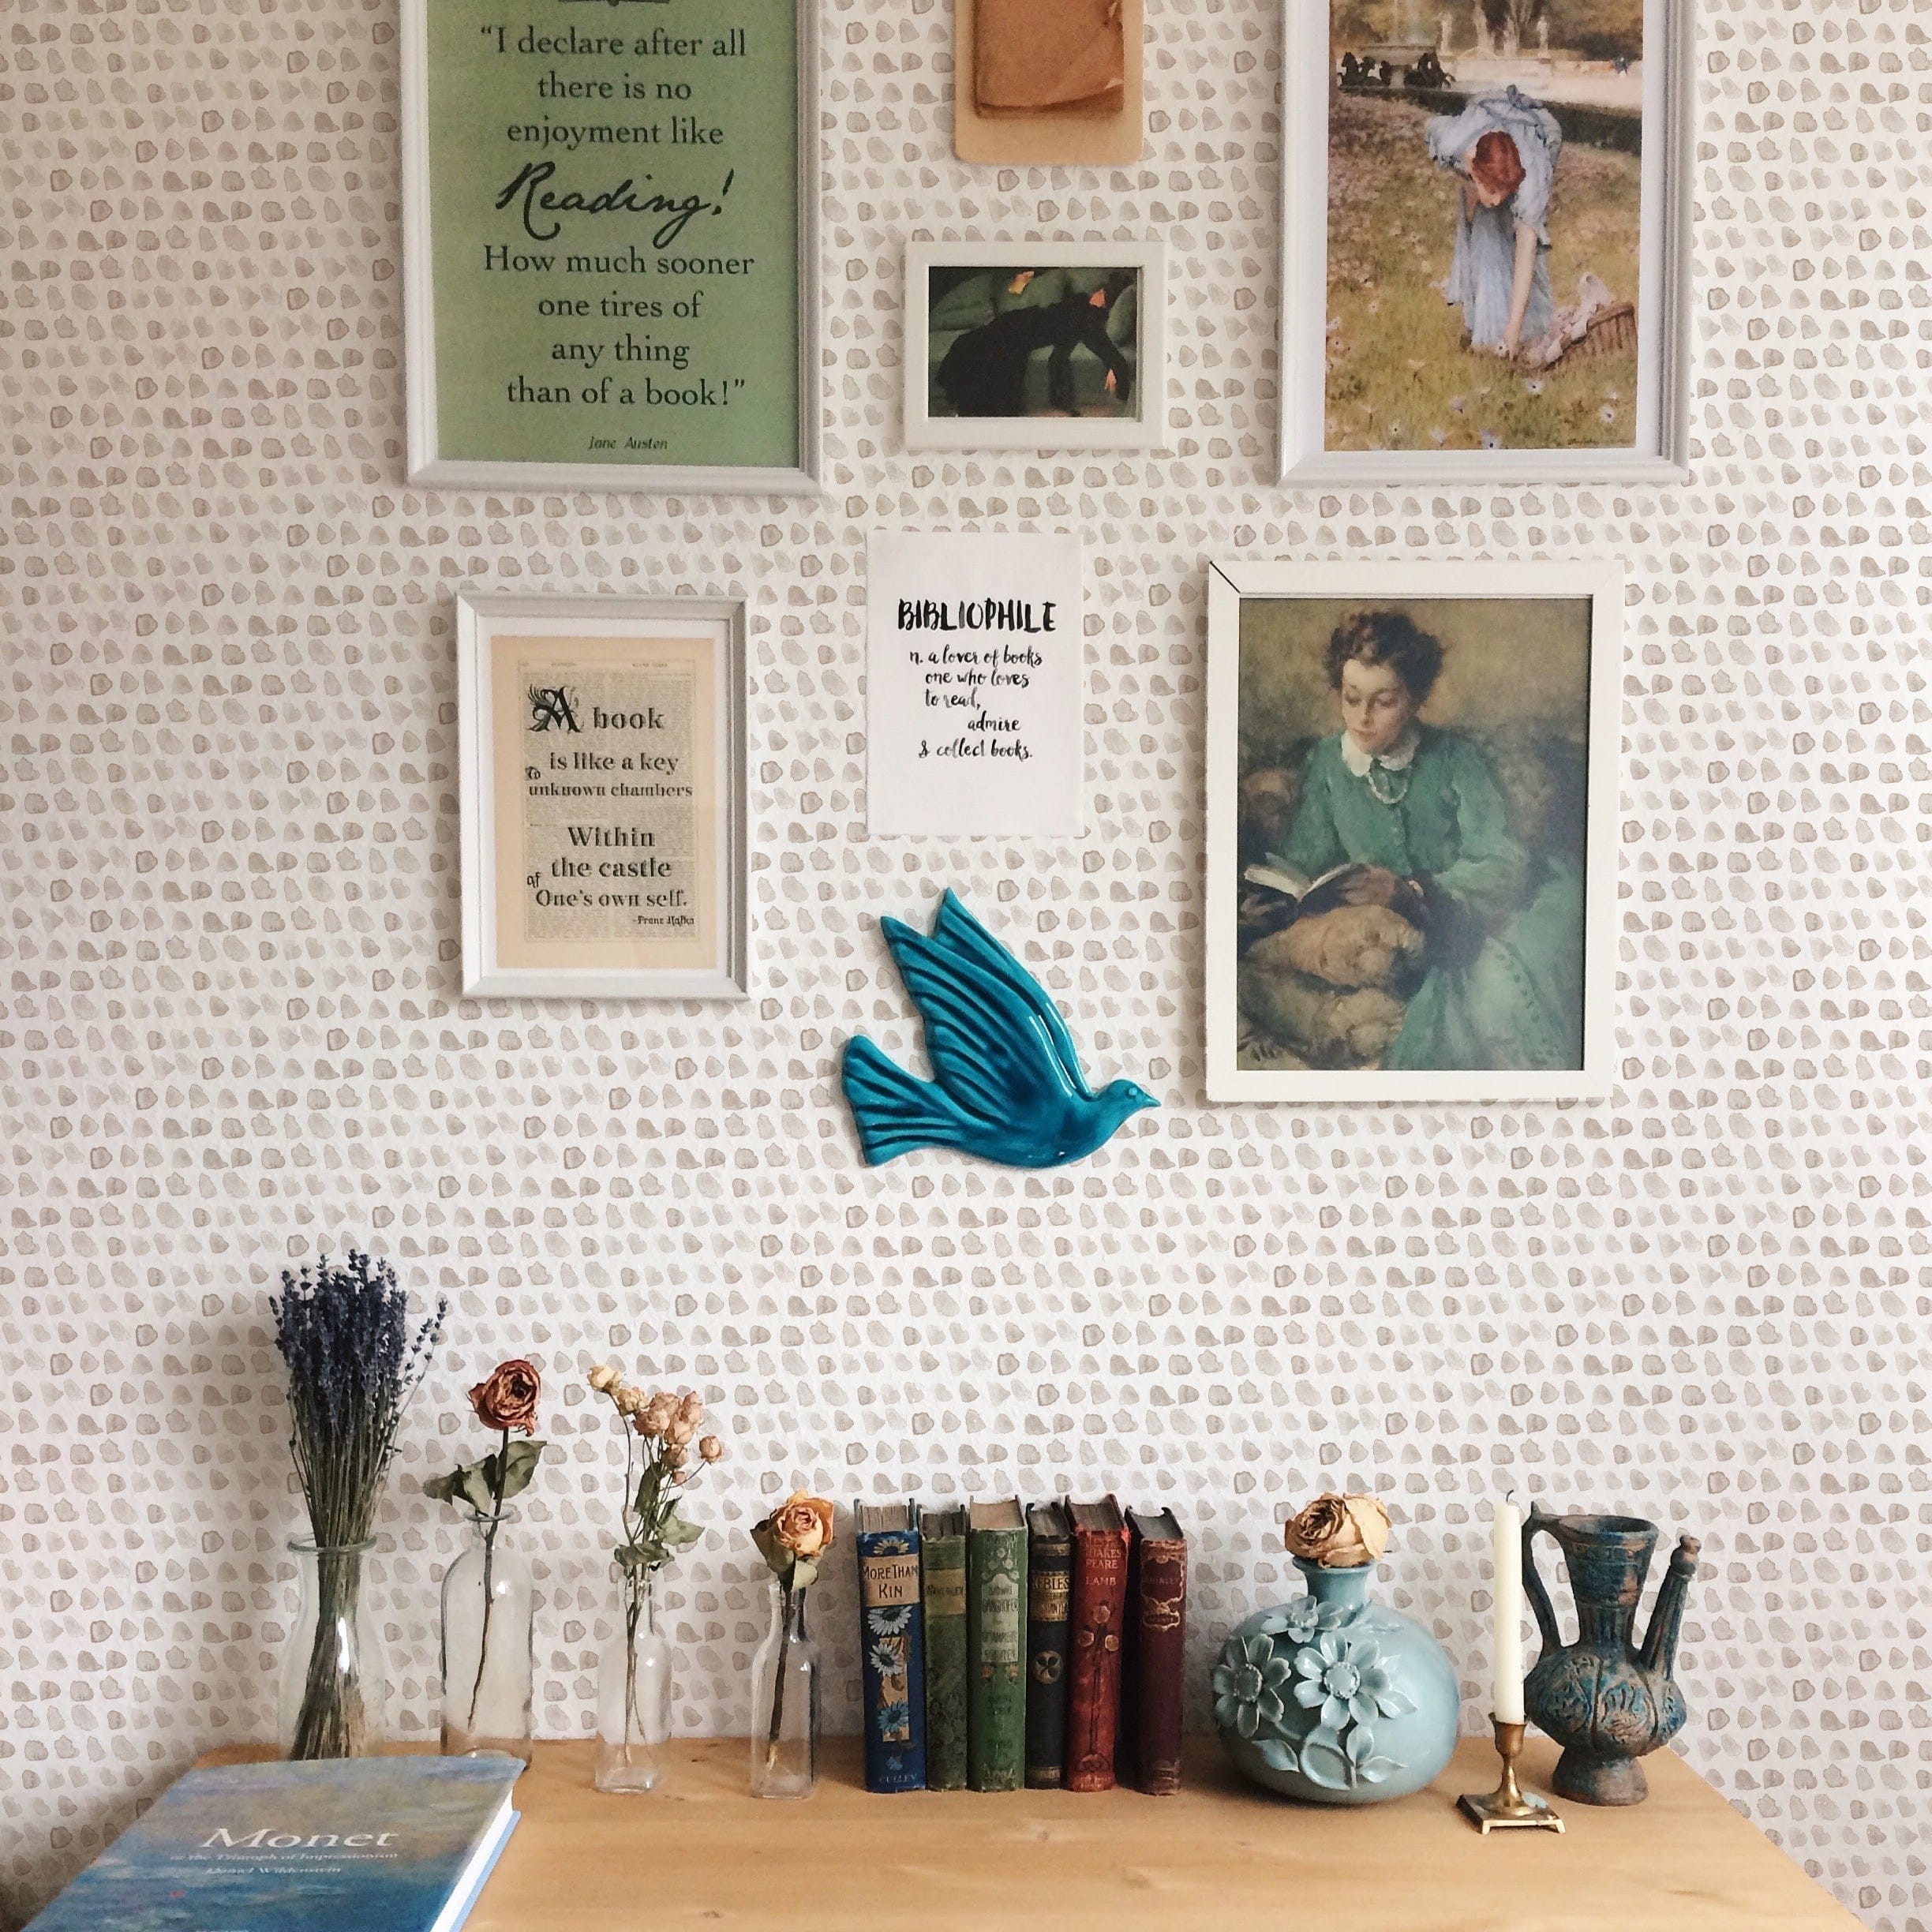 A cozy room corner decorated with Hand Painted Dots Wallpaper - Beige, adorned with various wall hangings and a collection of vintage books and decorative items on a wooden shelf, showcasing the wallpaper's compatibility with warm, inviting decor.